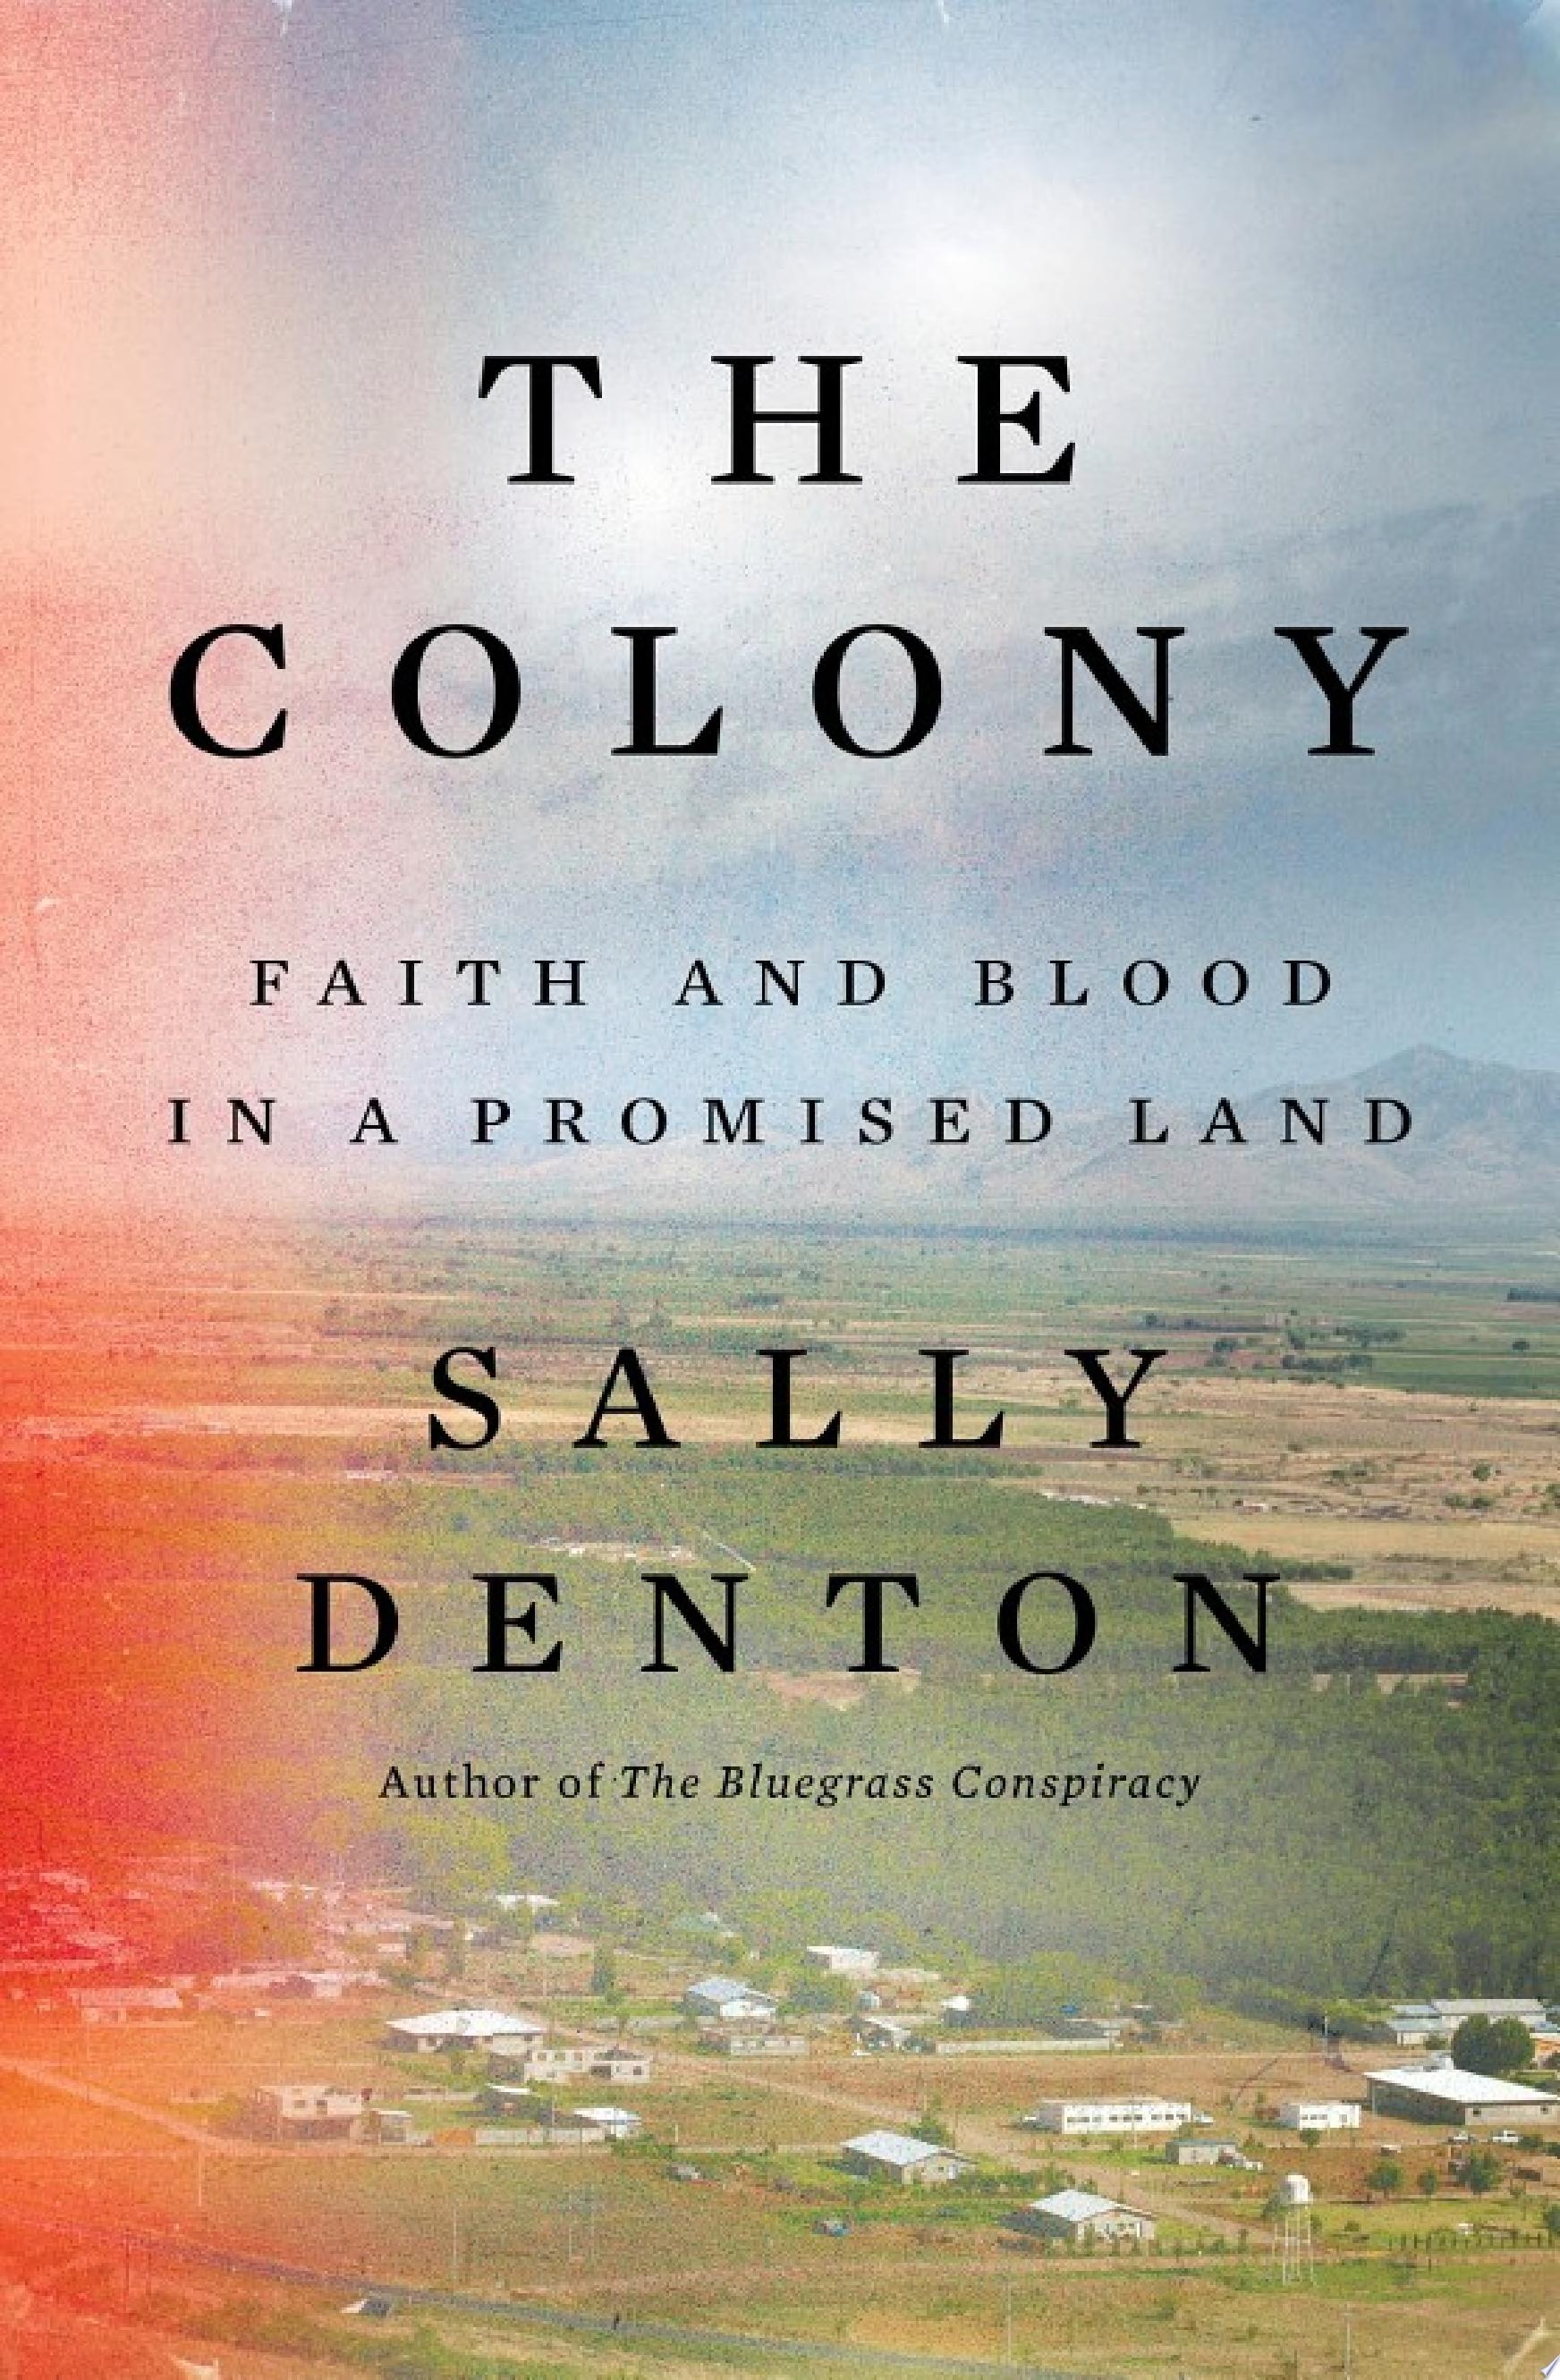 Image for "The Colony: Faith and Blood in a Promised Land"